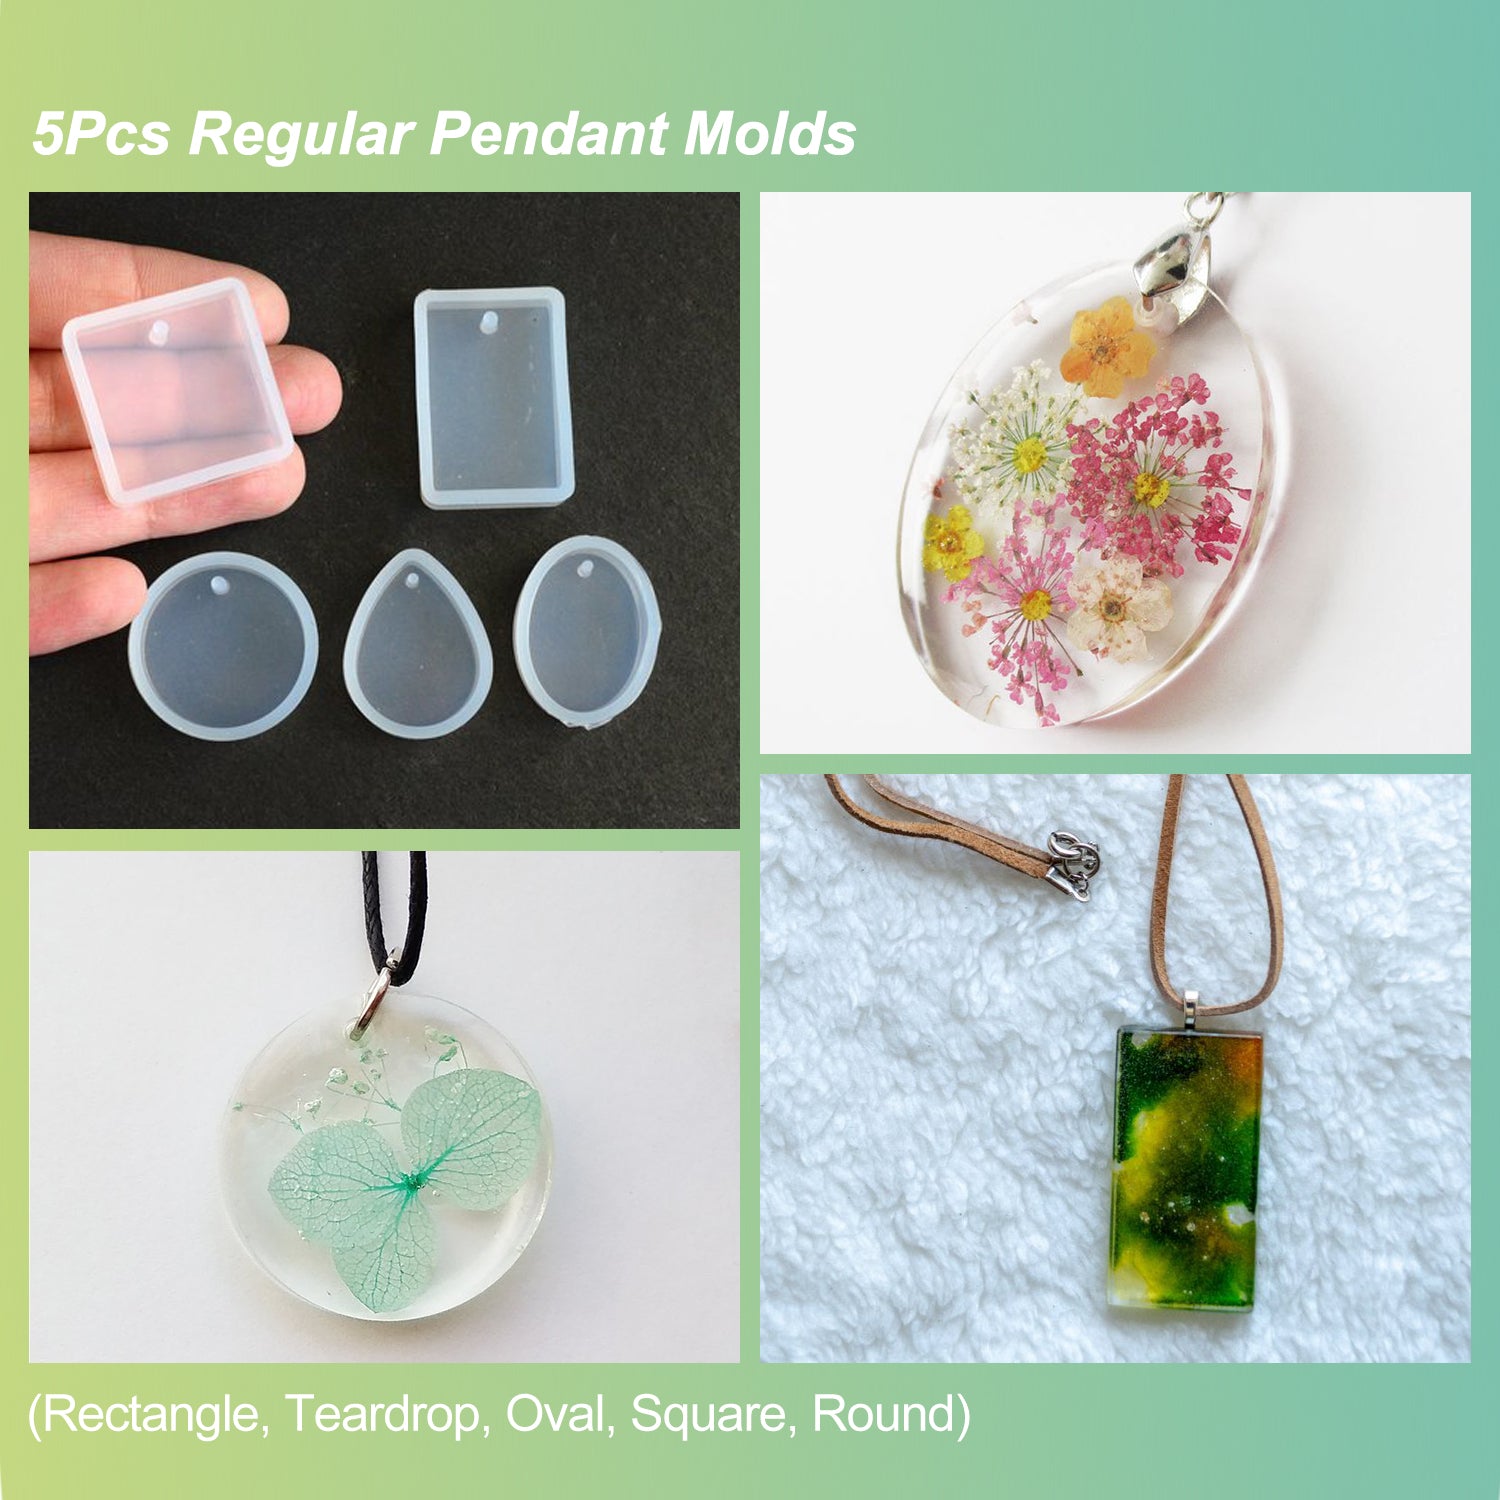 LET'S RESIN Resin Jewelry Molds for Beginners,16pcs Resin Jewelry Making  Kit With Barcelet Molds,pendant Molds 